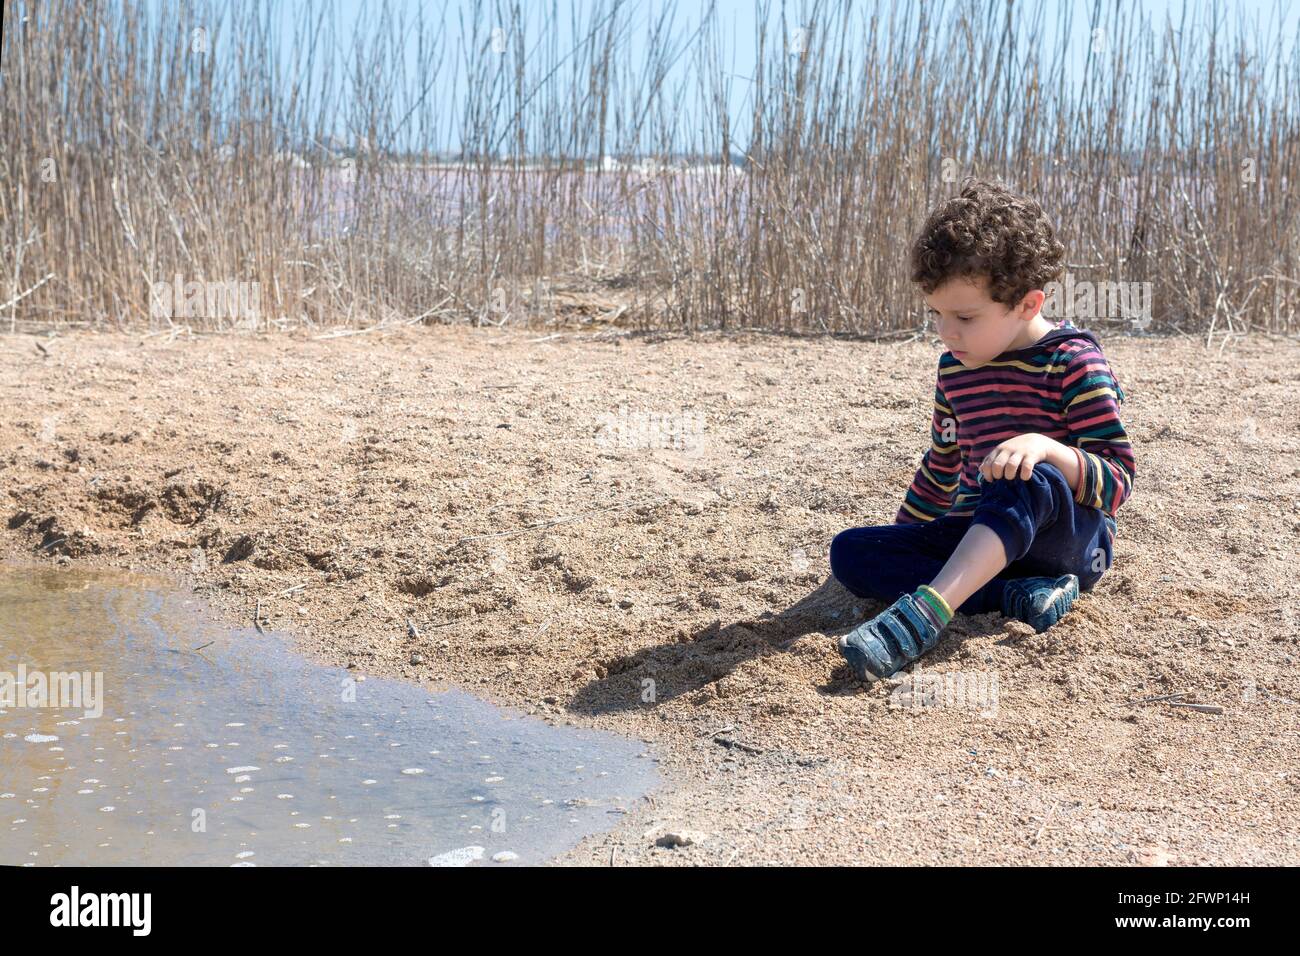 small boy of 4-5 years Caucasian with curly hair, playing with sand at the edge of pond on sunny day with colored striped shirt Stock Photo